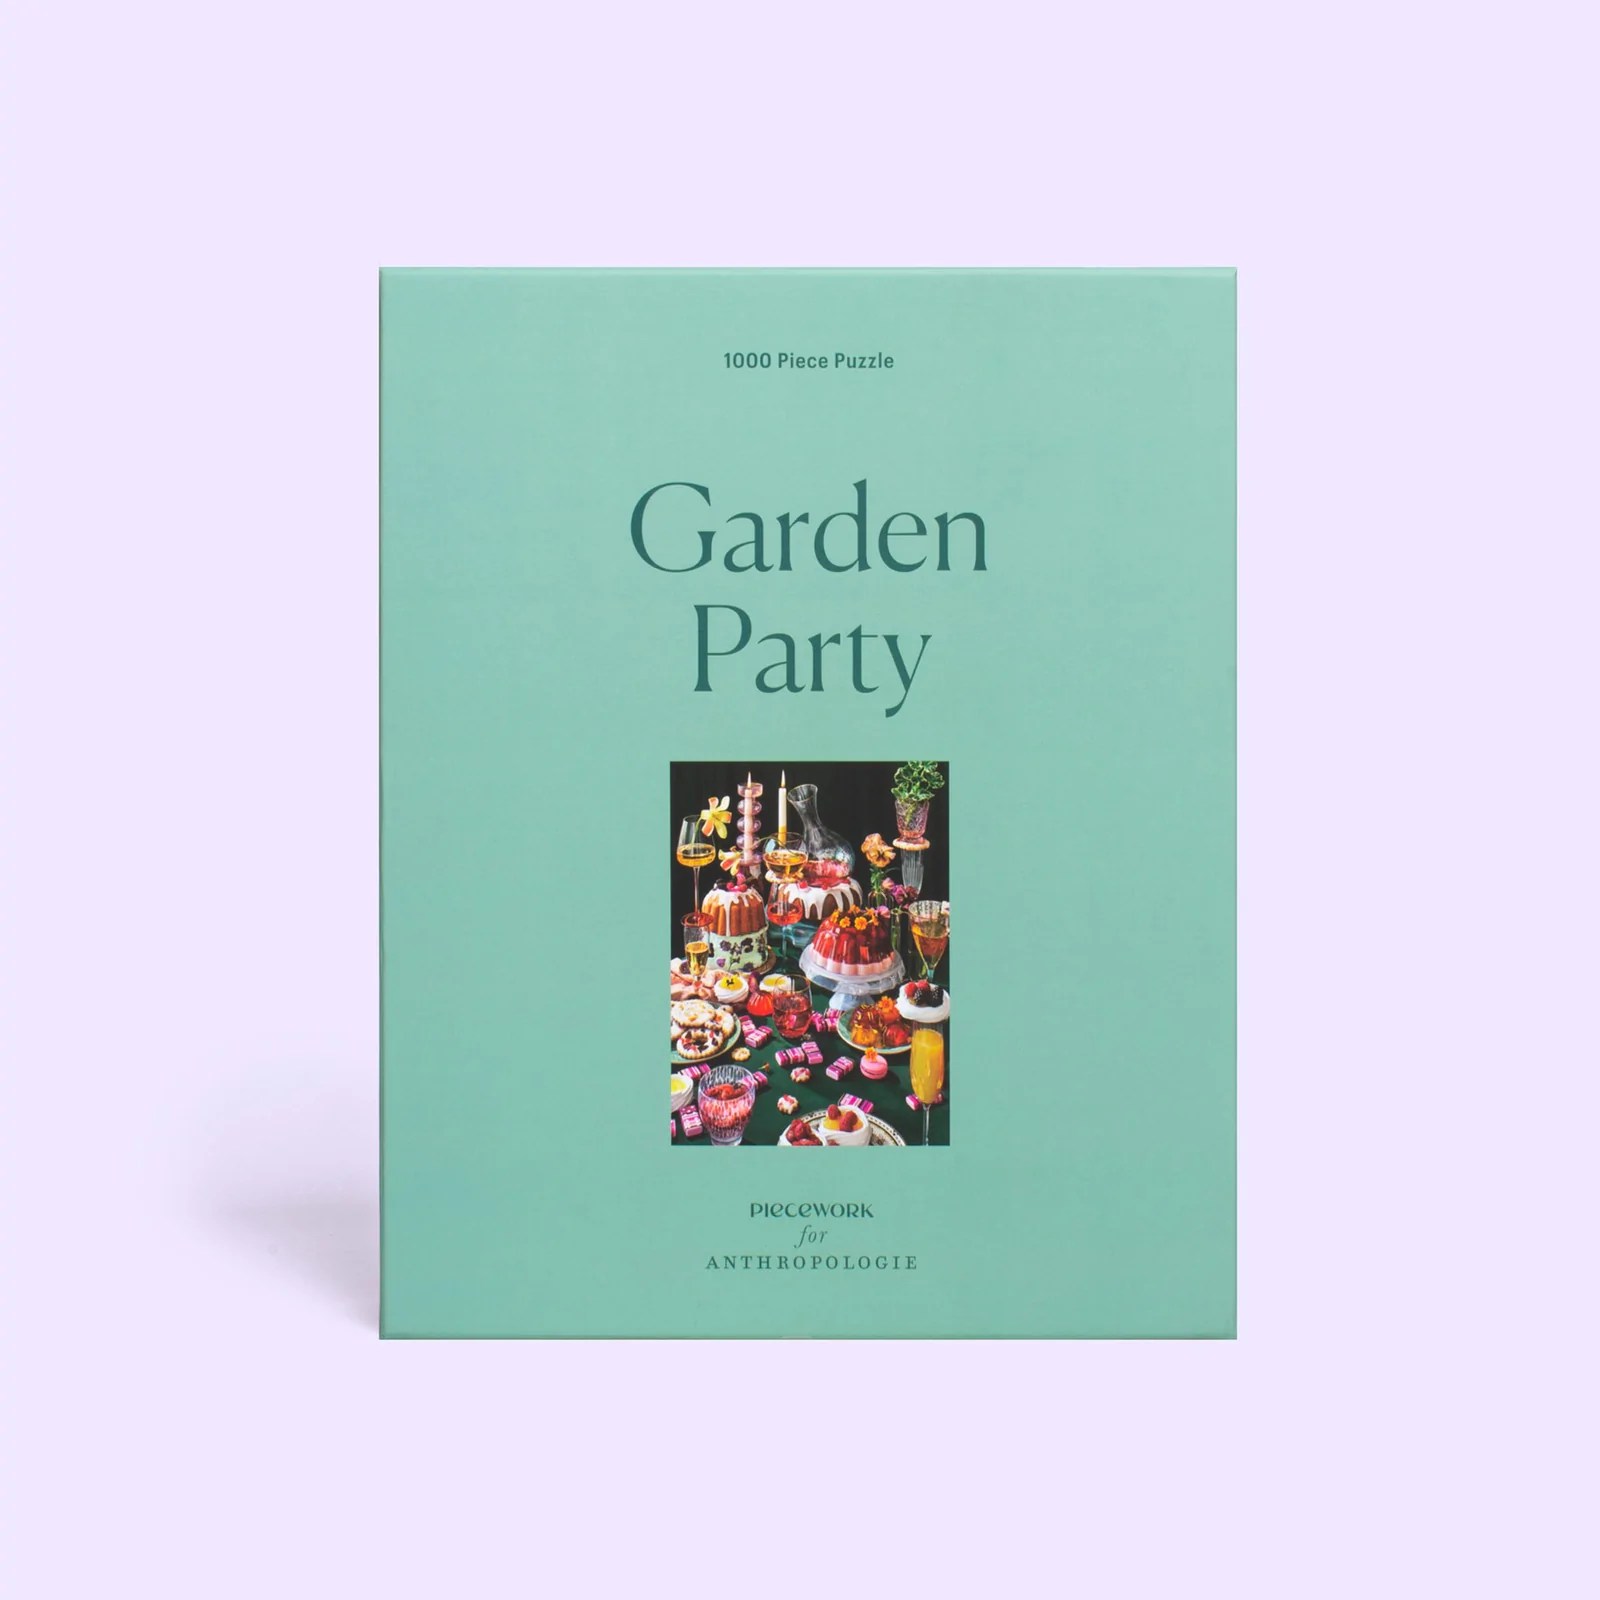 garden party puzzle in a green box on a lavender background